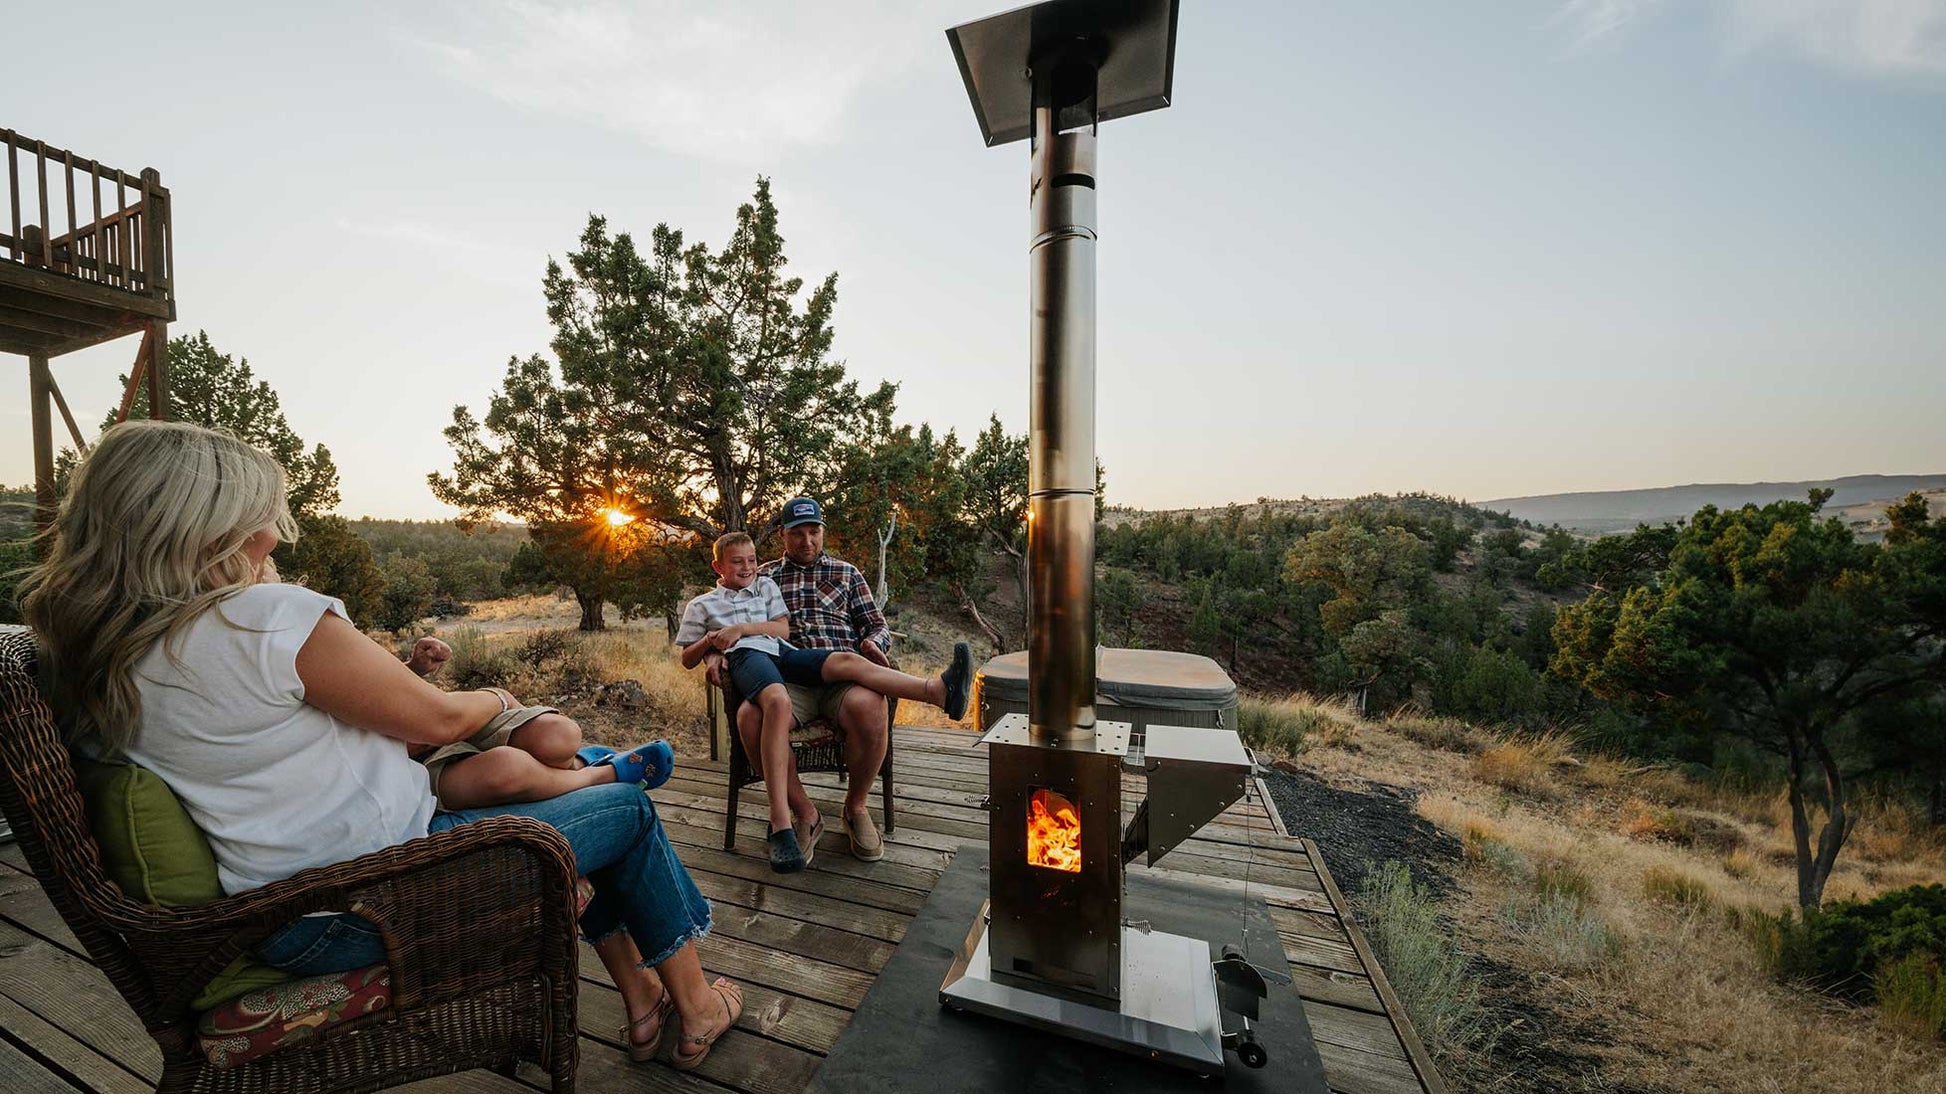 Timber Stoves Lil Timber Patio Heater